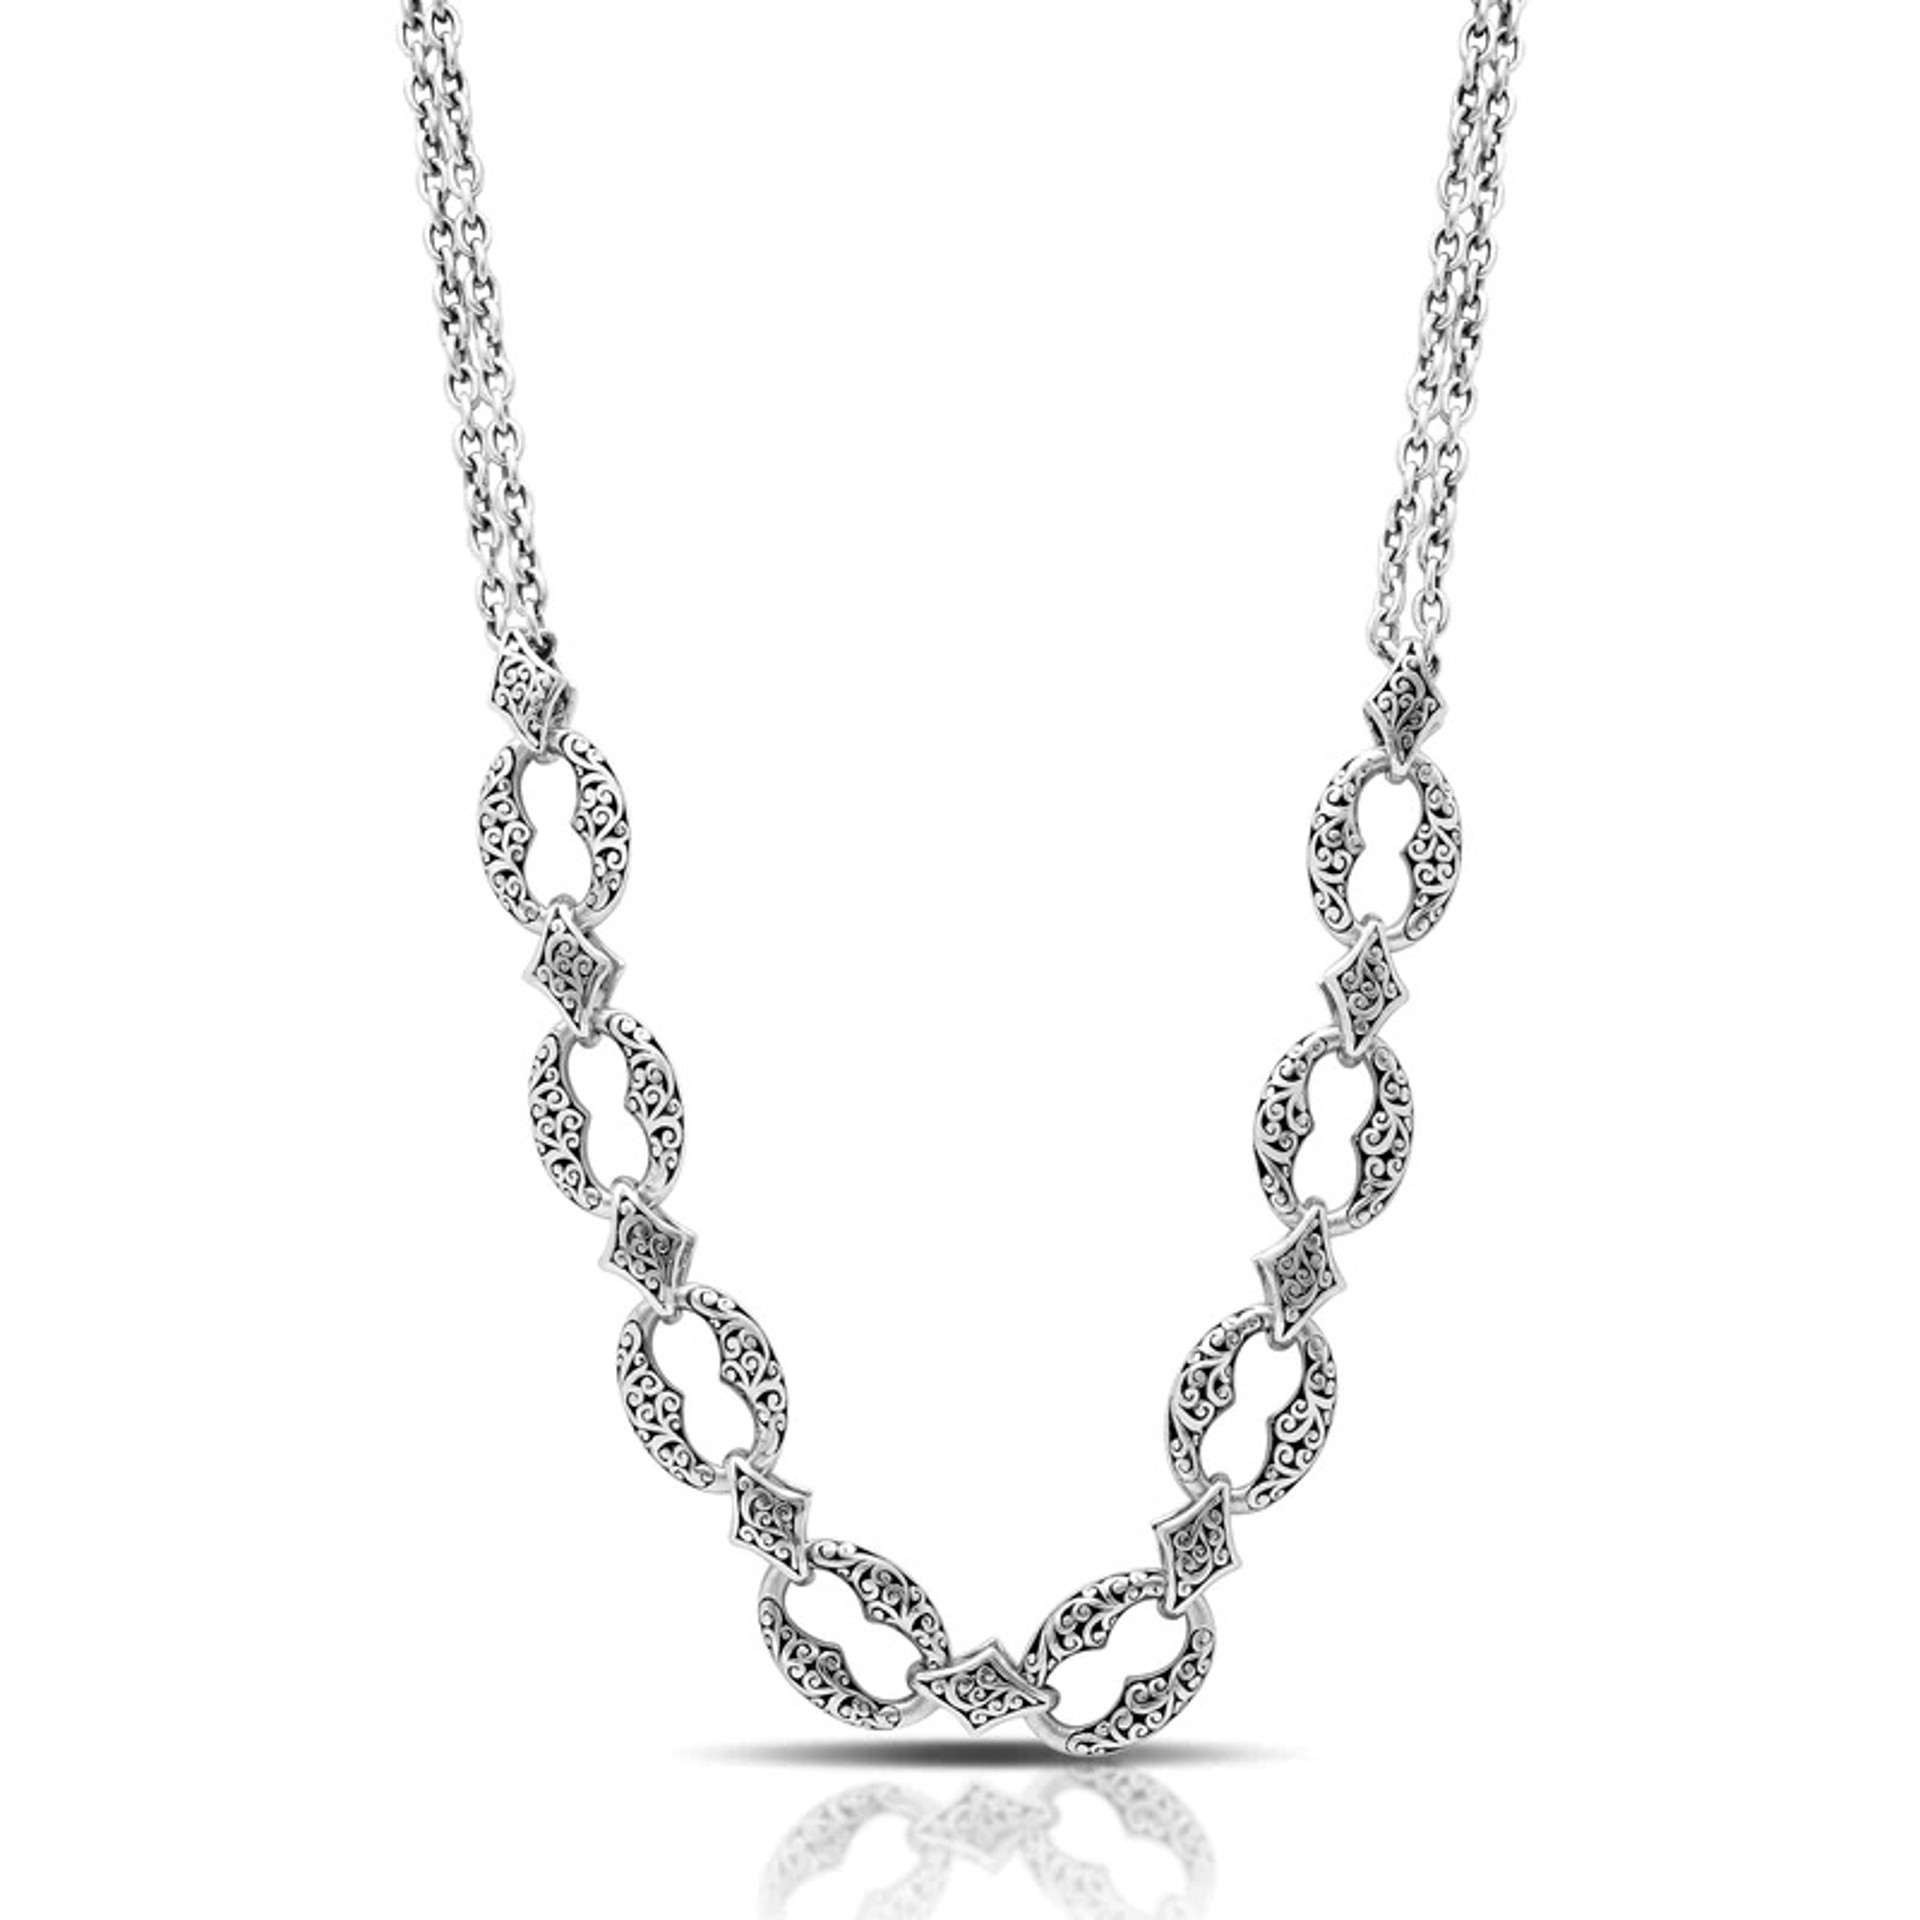 1035 Stylized LH Scroll Link with Double Chain Necklace 19" - 22" (SO) by Lois Hill